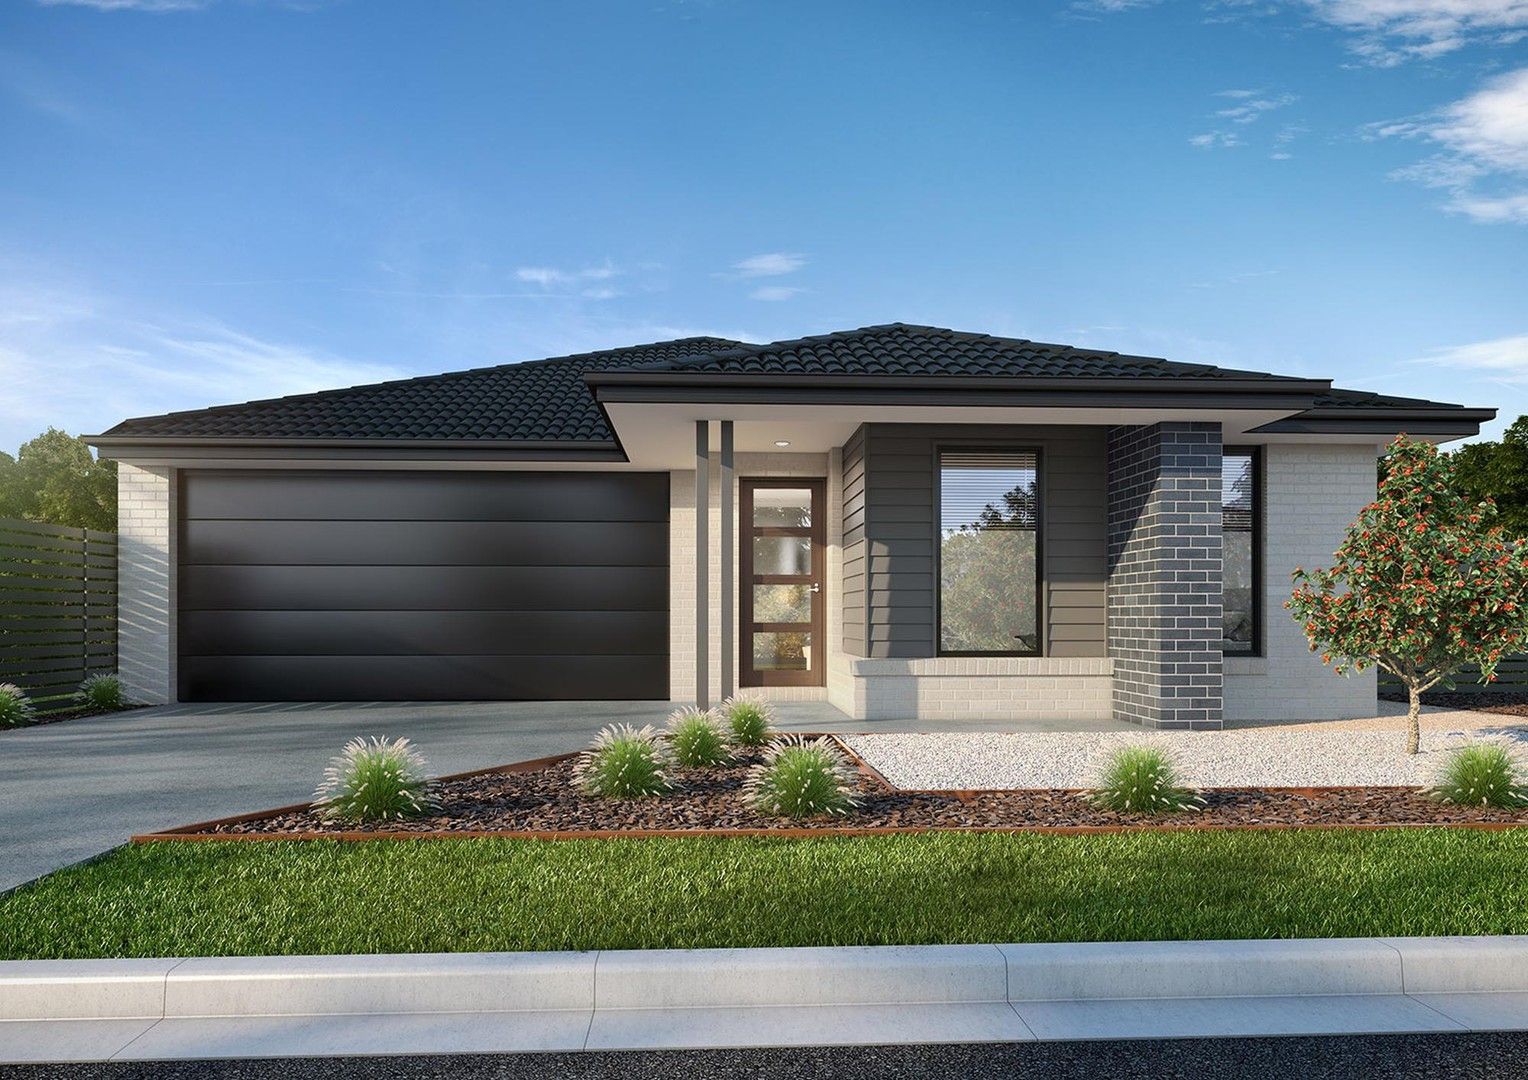 3 bedrooms New House & Land in 619 The Reserve Estate CHARLEMONT VIC, 3217